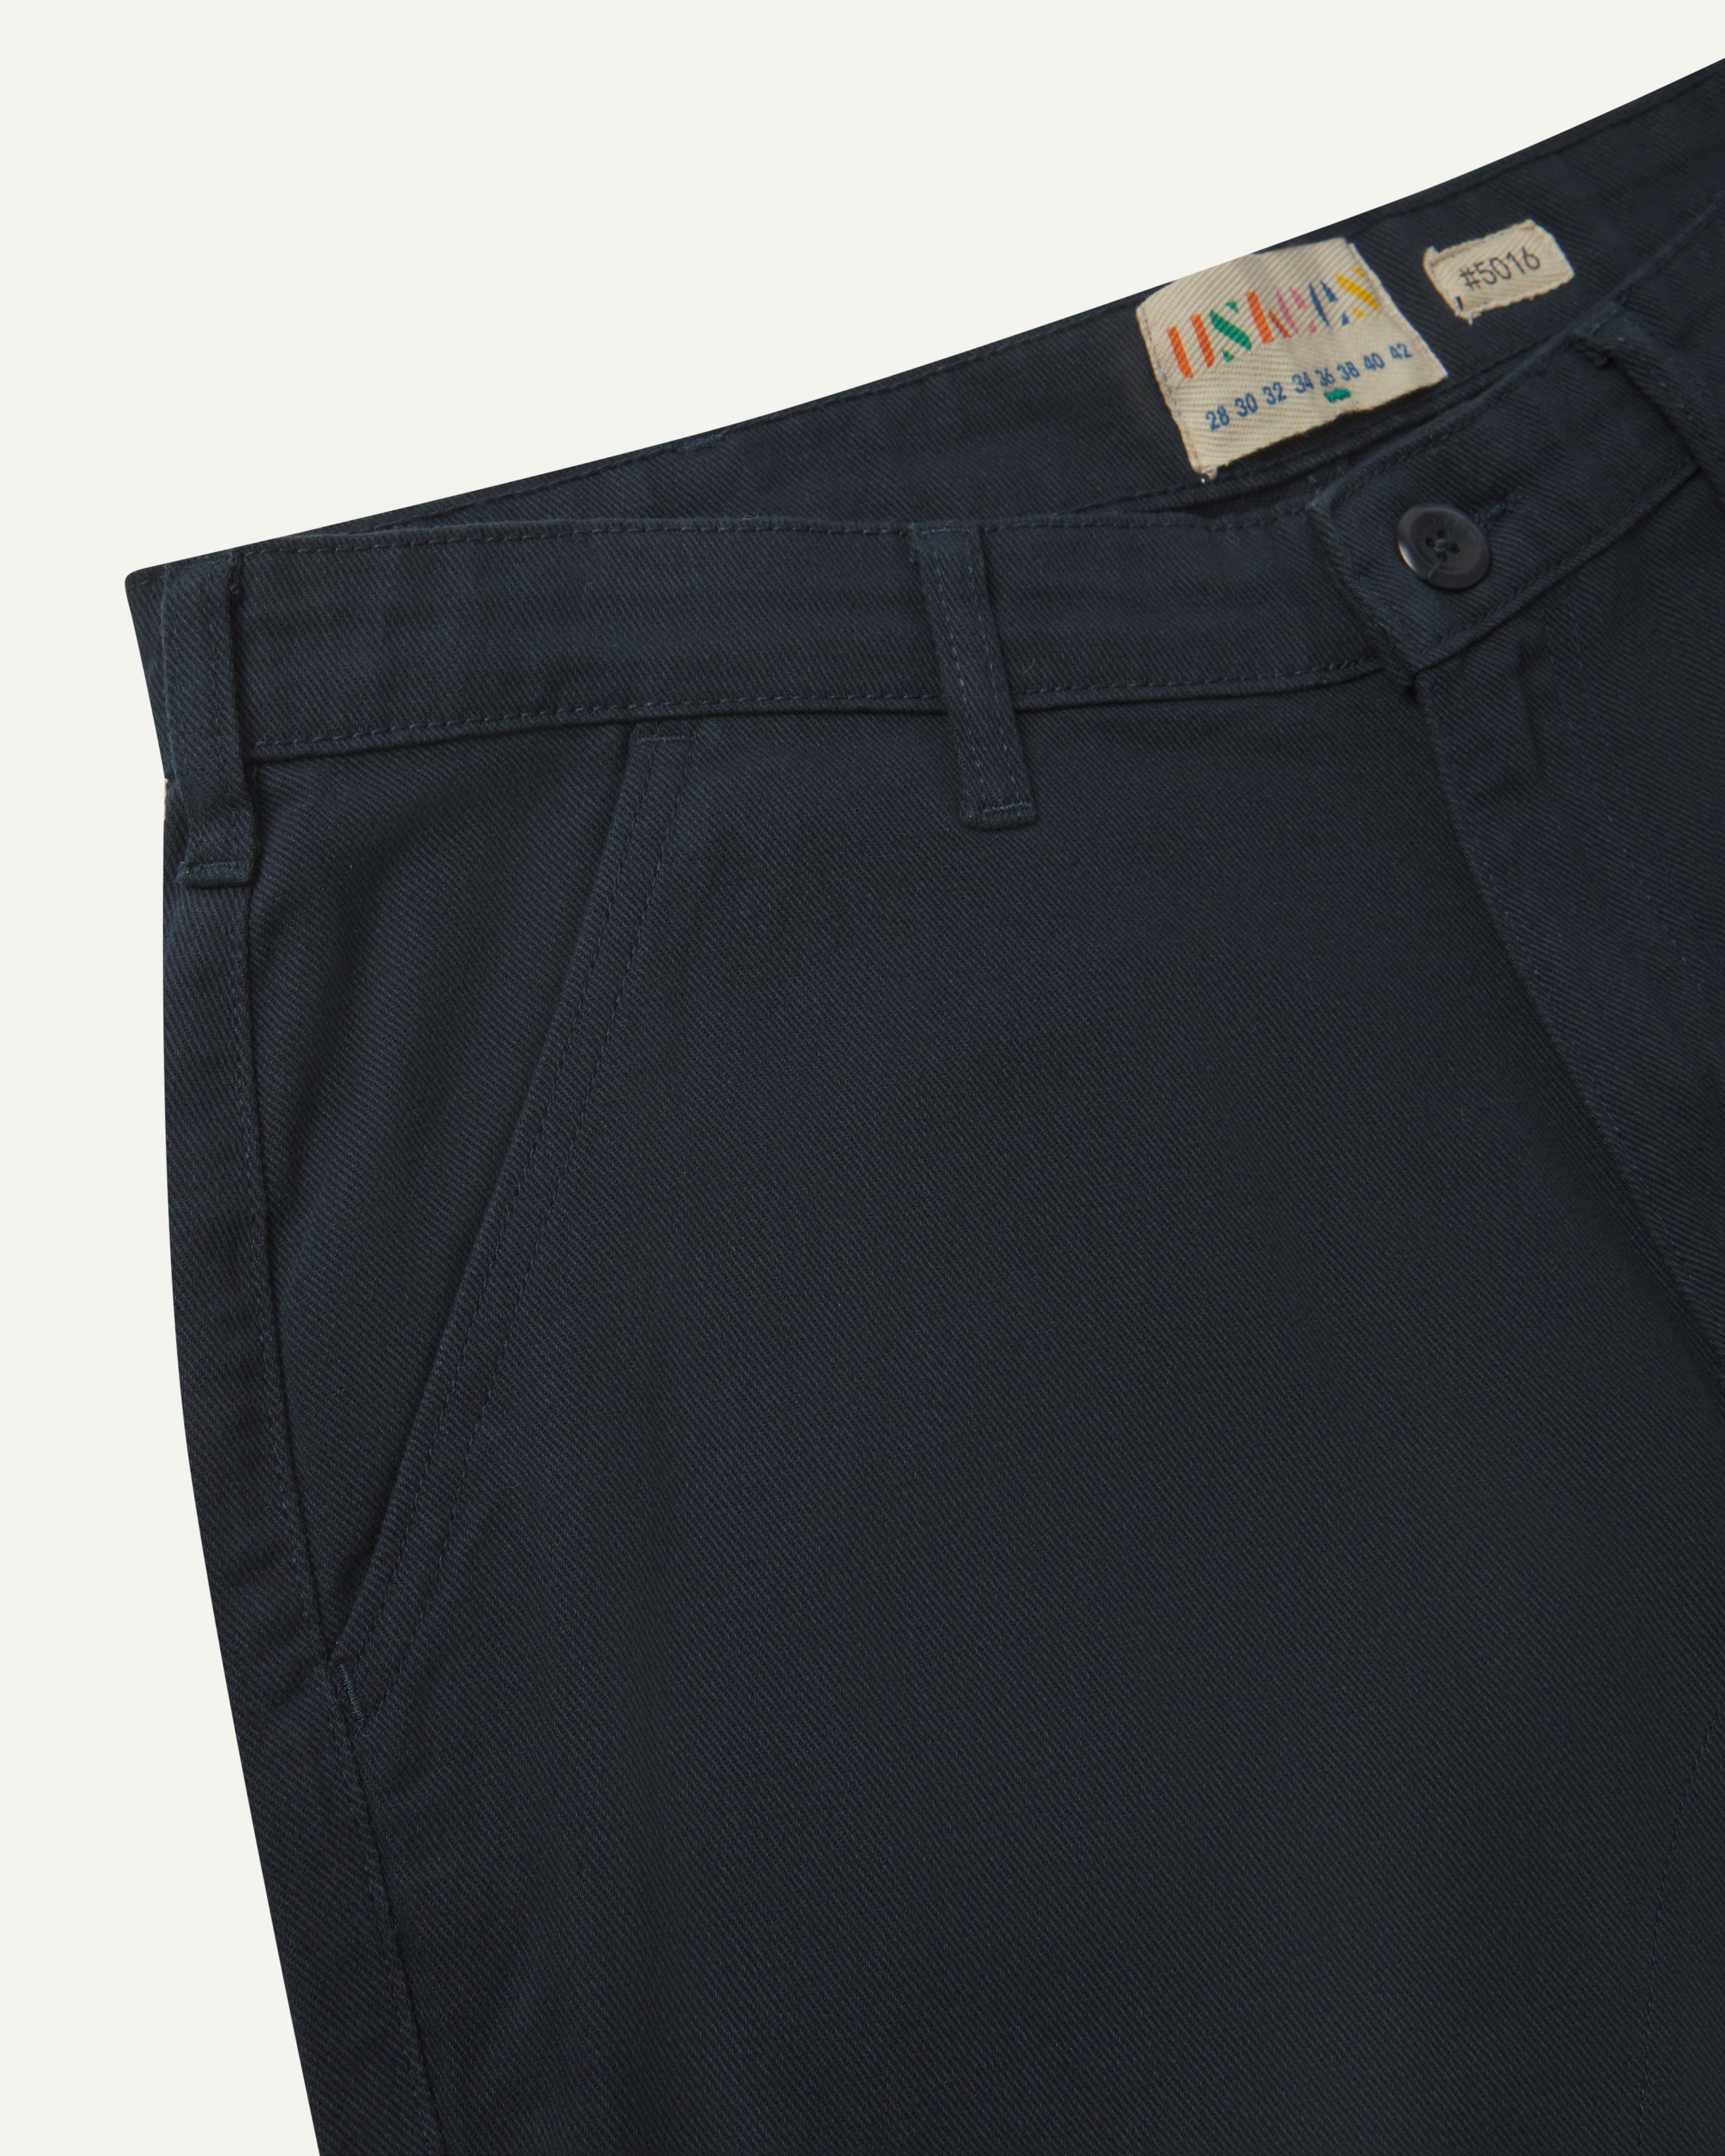 Front close view of uskees cotton drill 'commuter' trousers for men in dark blue showing belt loops, front pocket and brand/size label at waist.